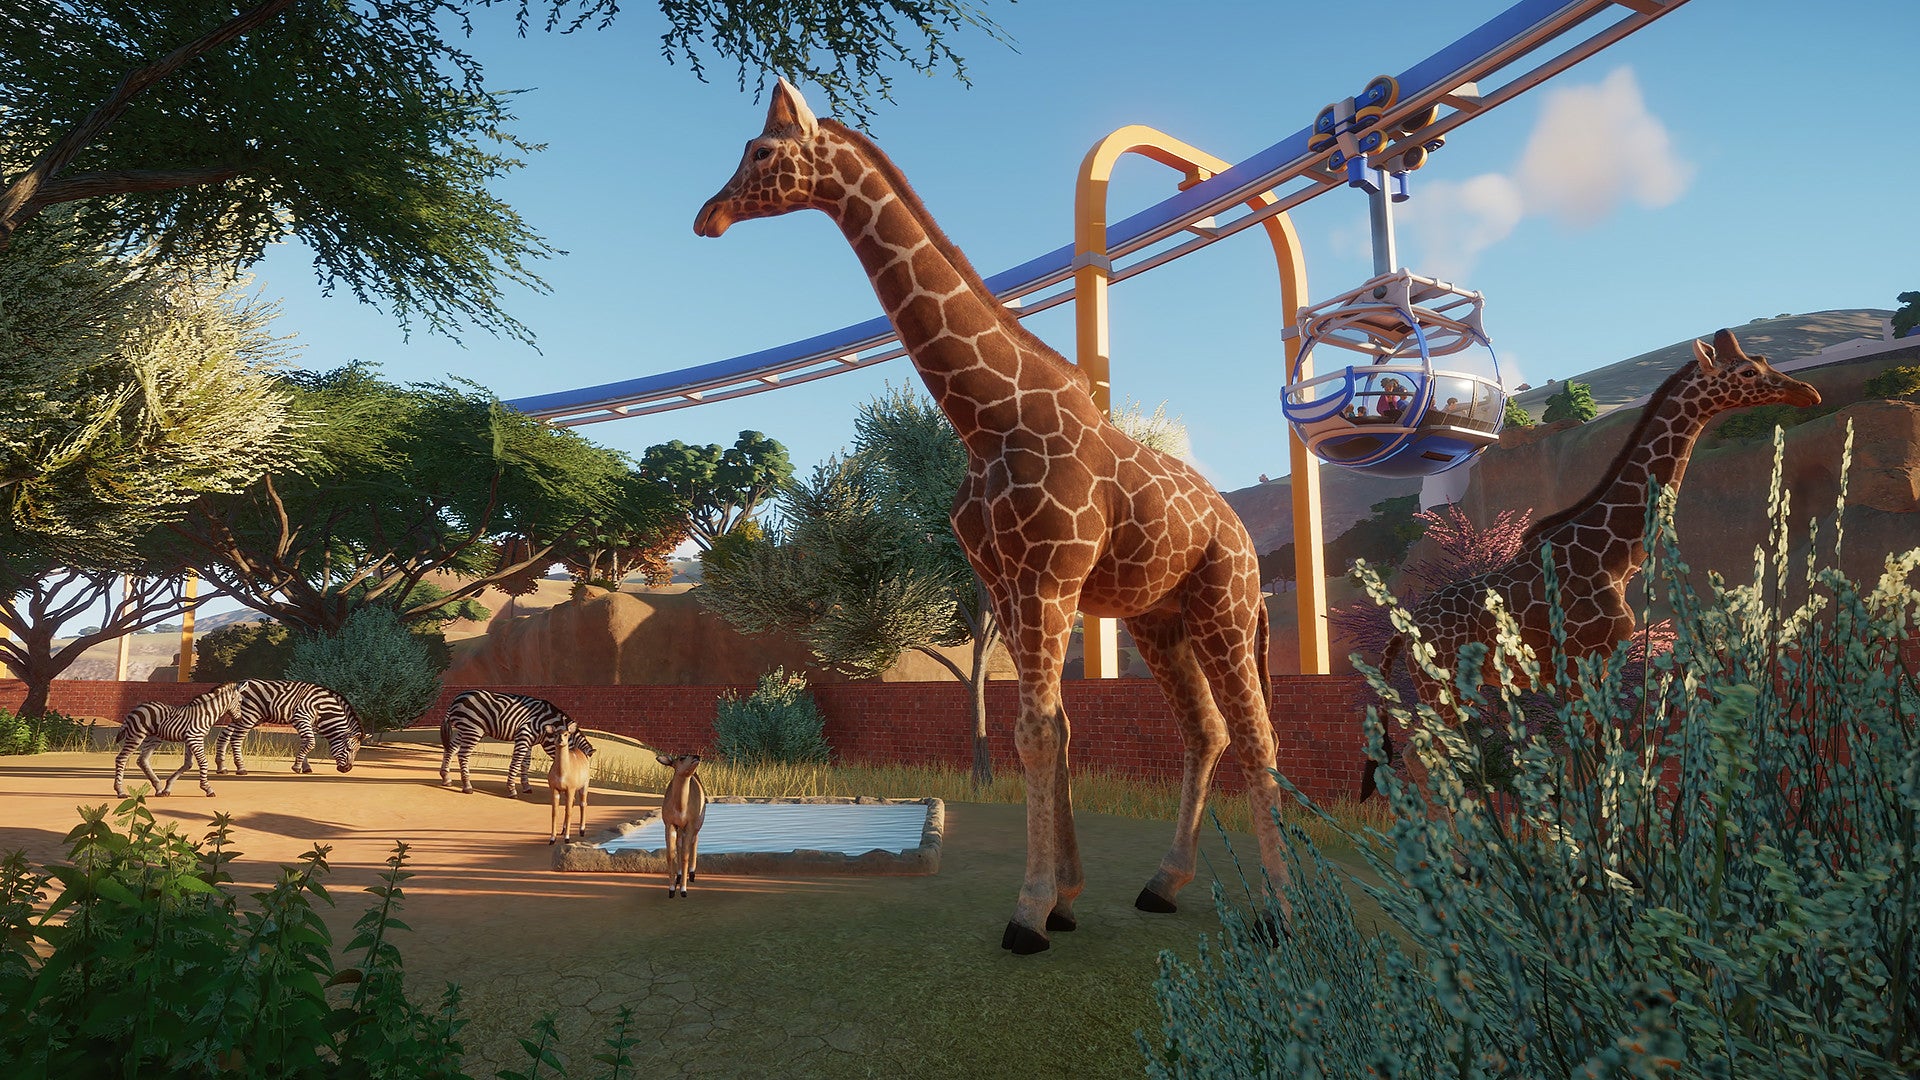 Image for Planet Zoo: How to visit others zoos and earn Conservation Credits